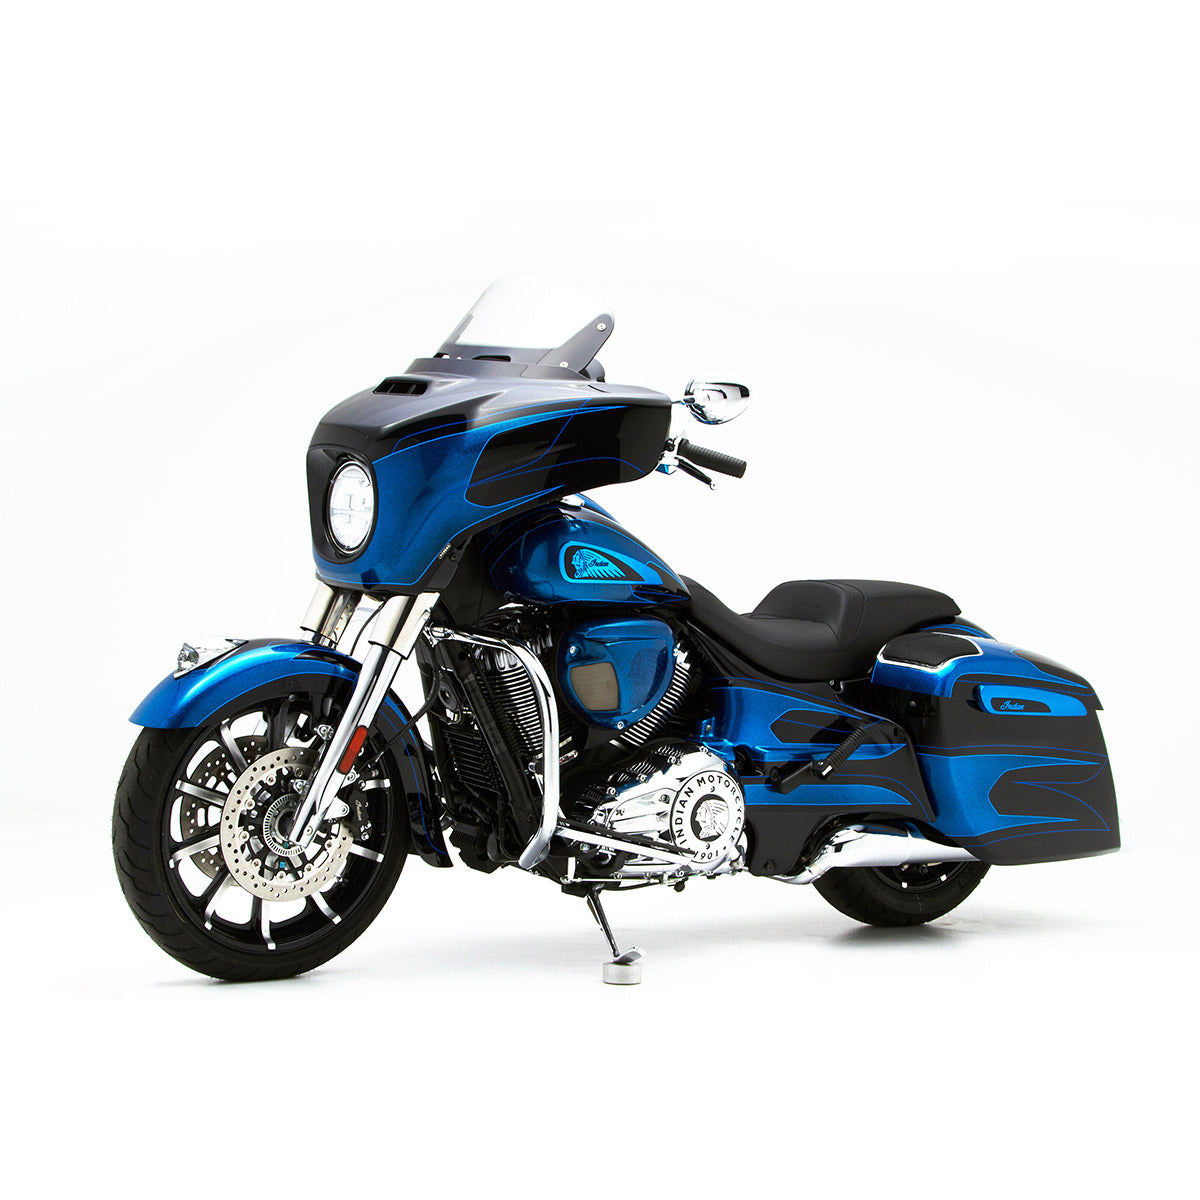 Reytelo Air Cleaner Cover for Indian® motorcycles shown on 2019 Chieftain(Shown on 2019 Chieftain)